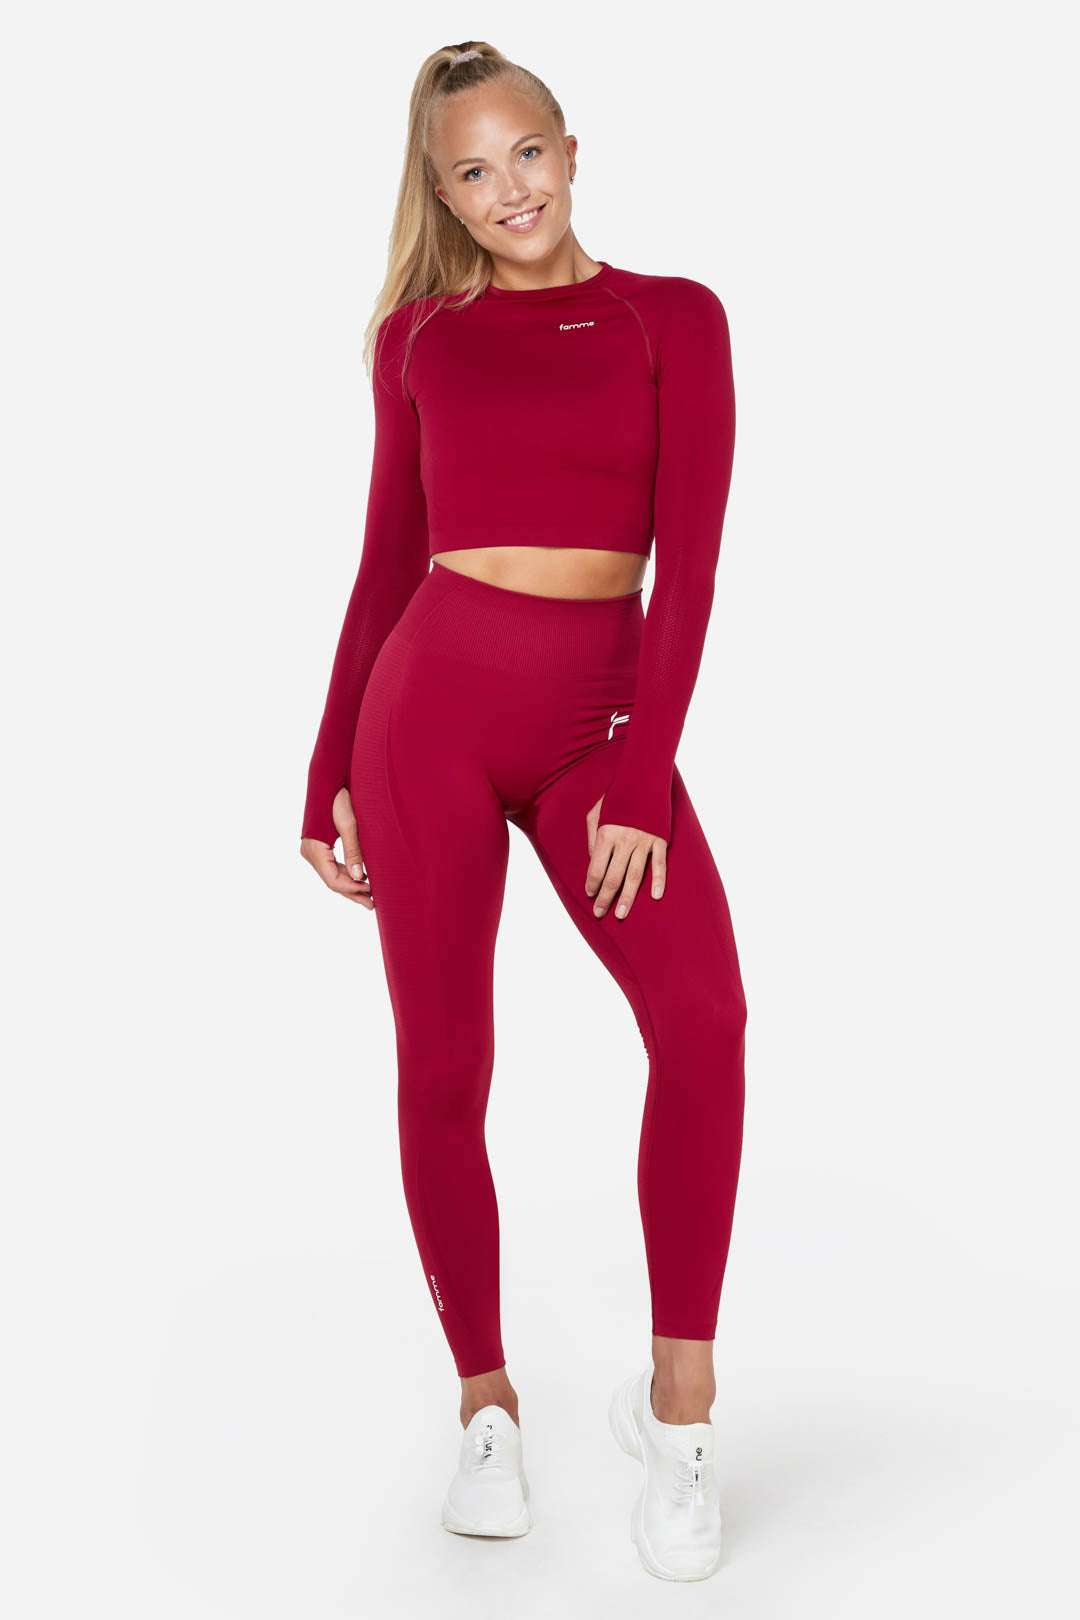 Red Vortex Tights 2 - for dame - Famme - Leggings